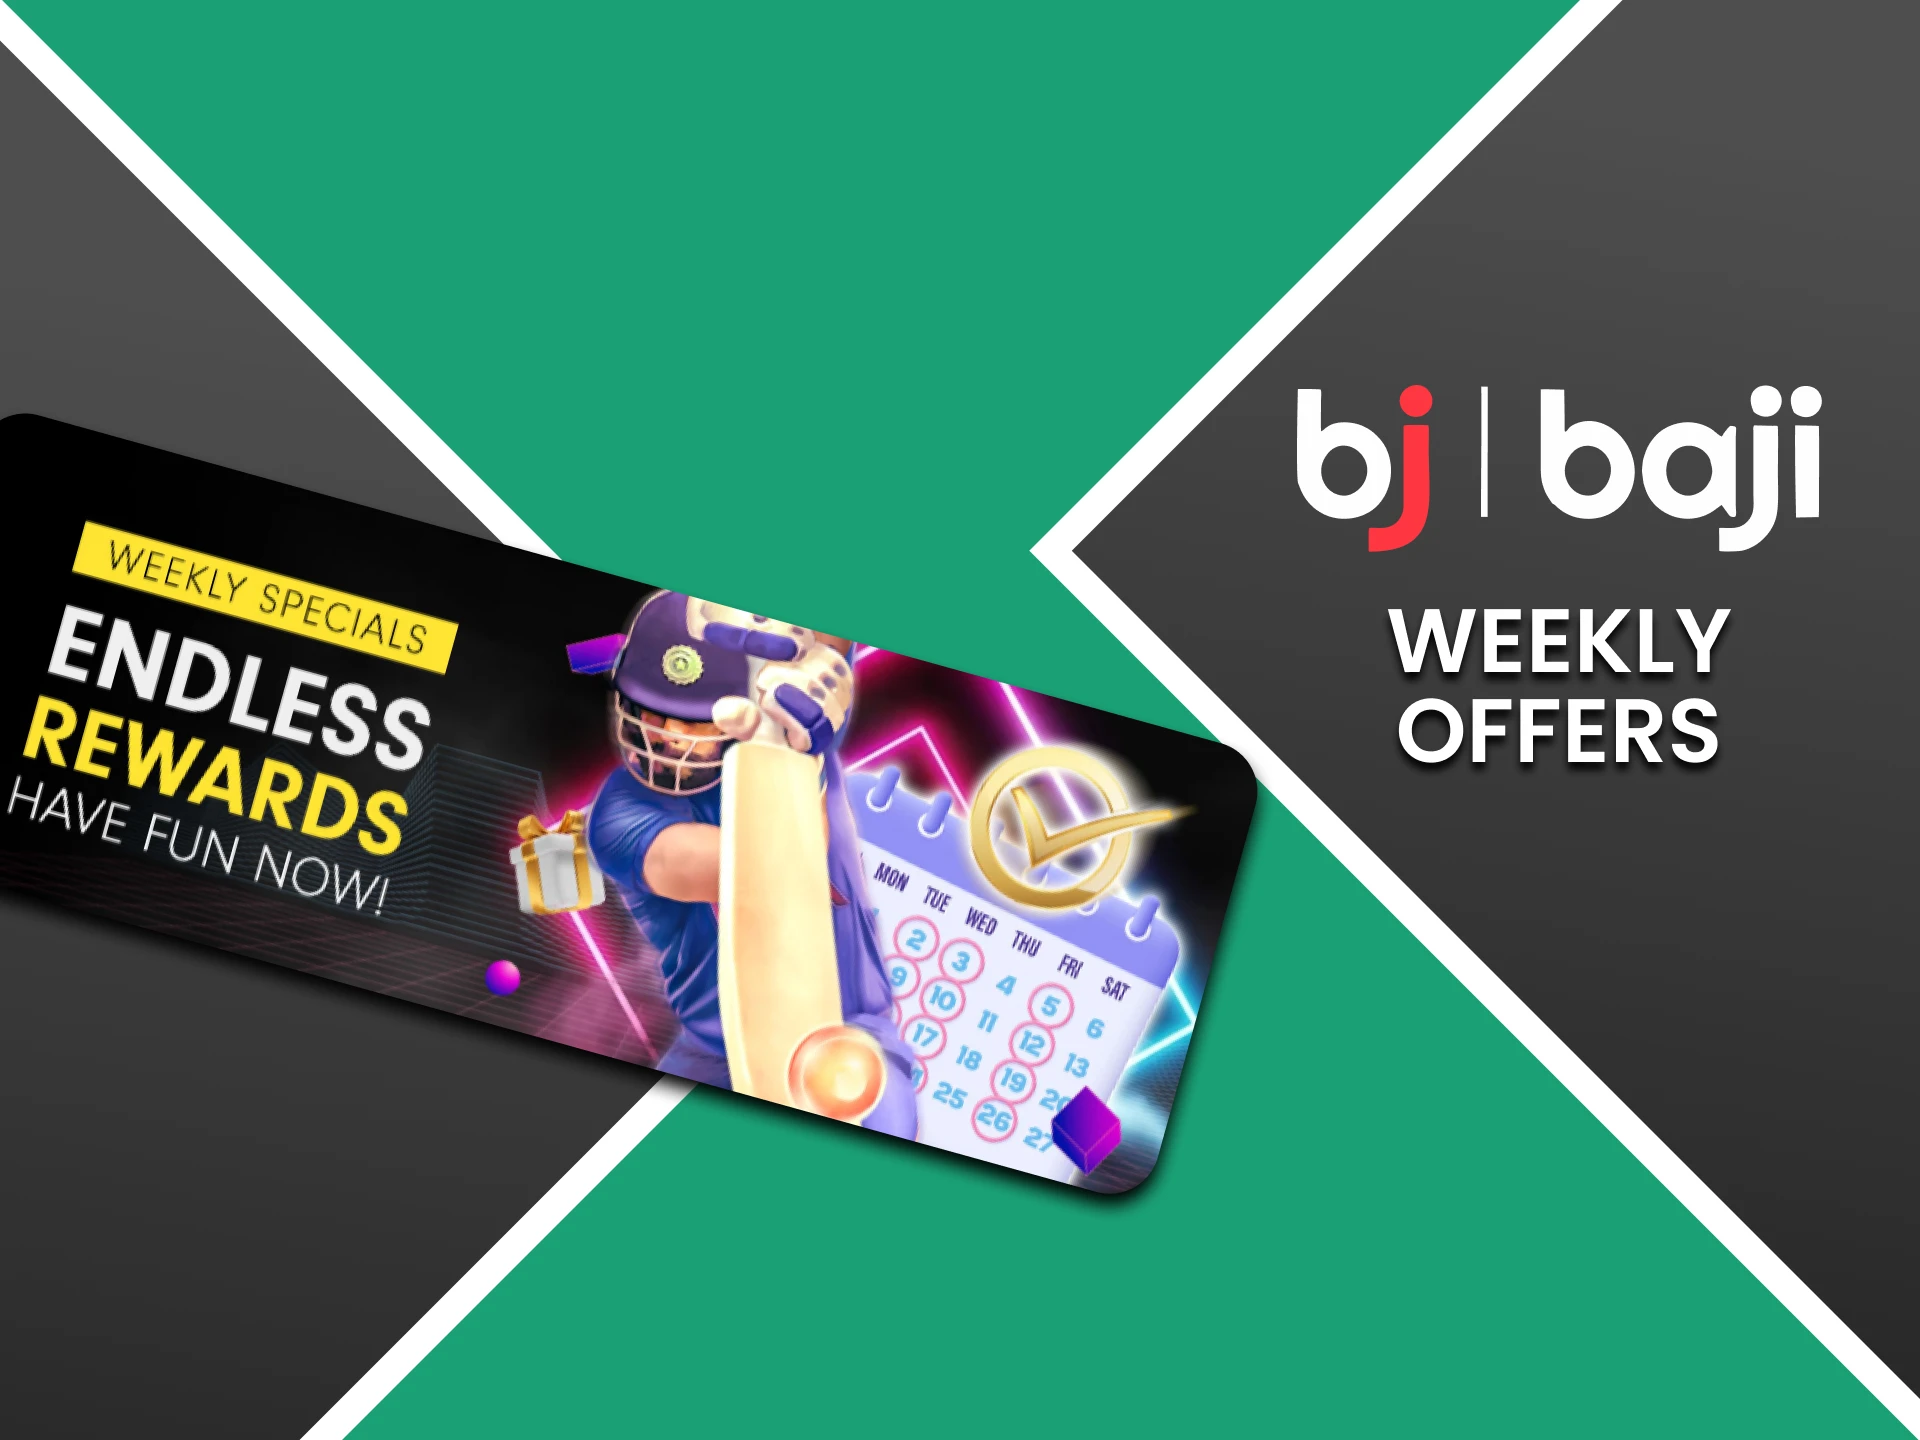 By registering with Baji you will receive weekly bonuses.